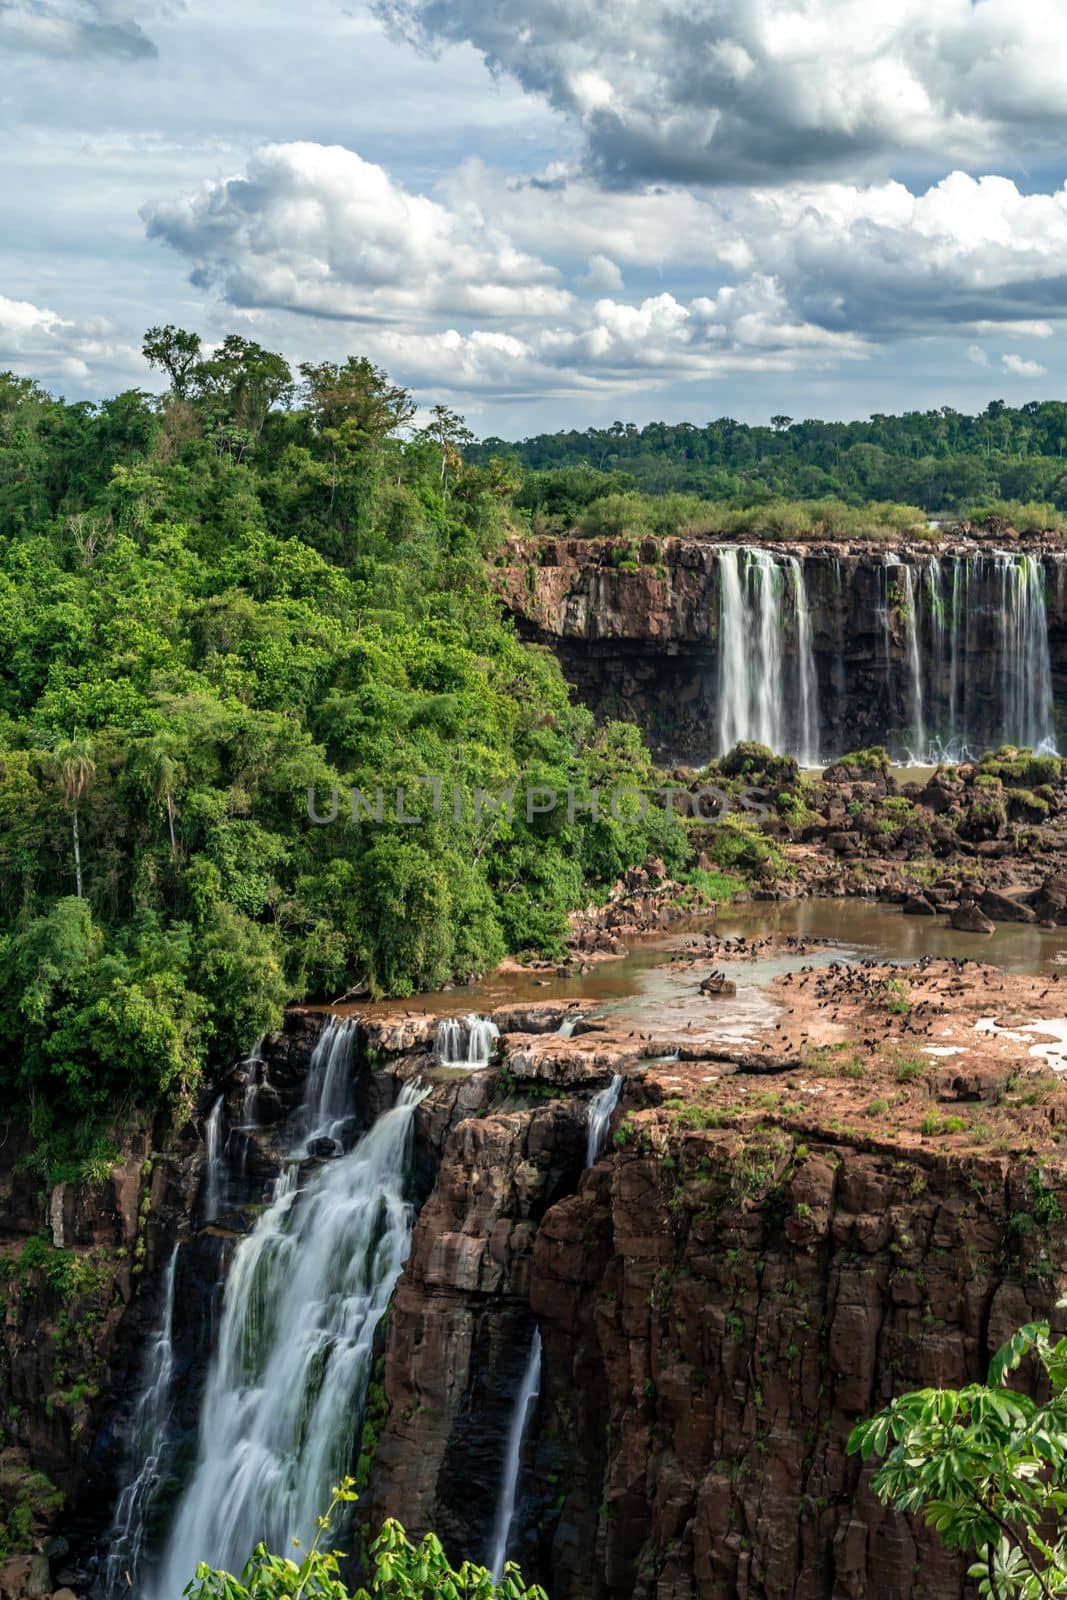 Iguazu Falls on the border of Brazil and Argentina in South America.